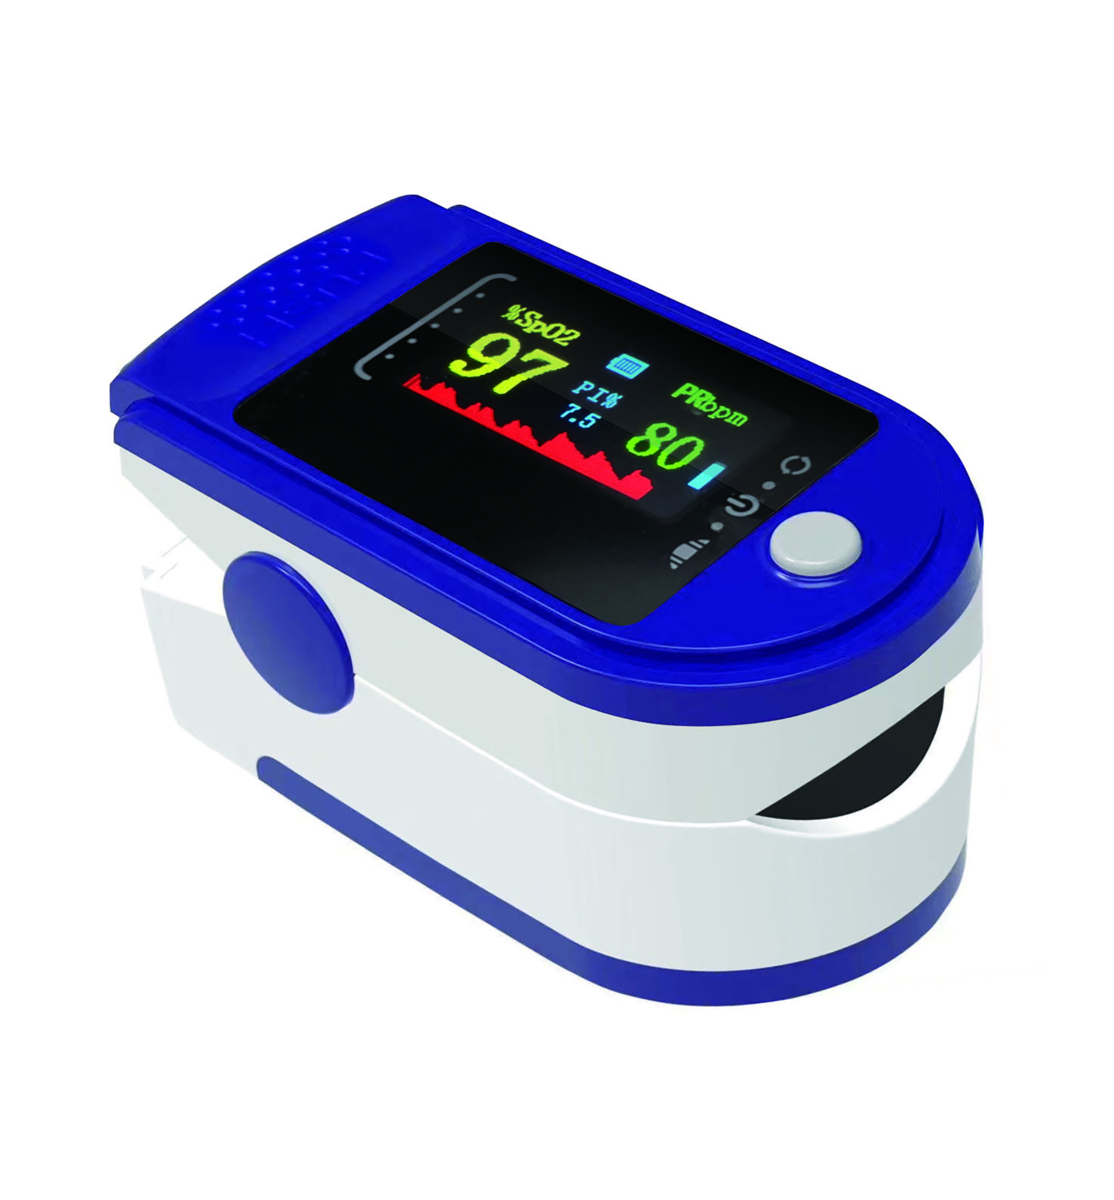 [ free shipping! immediate payment ]* home use ( well nes equipment ) oxygen saturation degree meter is .. kun (2 piece set )* oxygen saturation degree,..,.. finger .,. wave wave shape. verification 